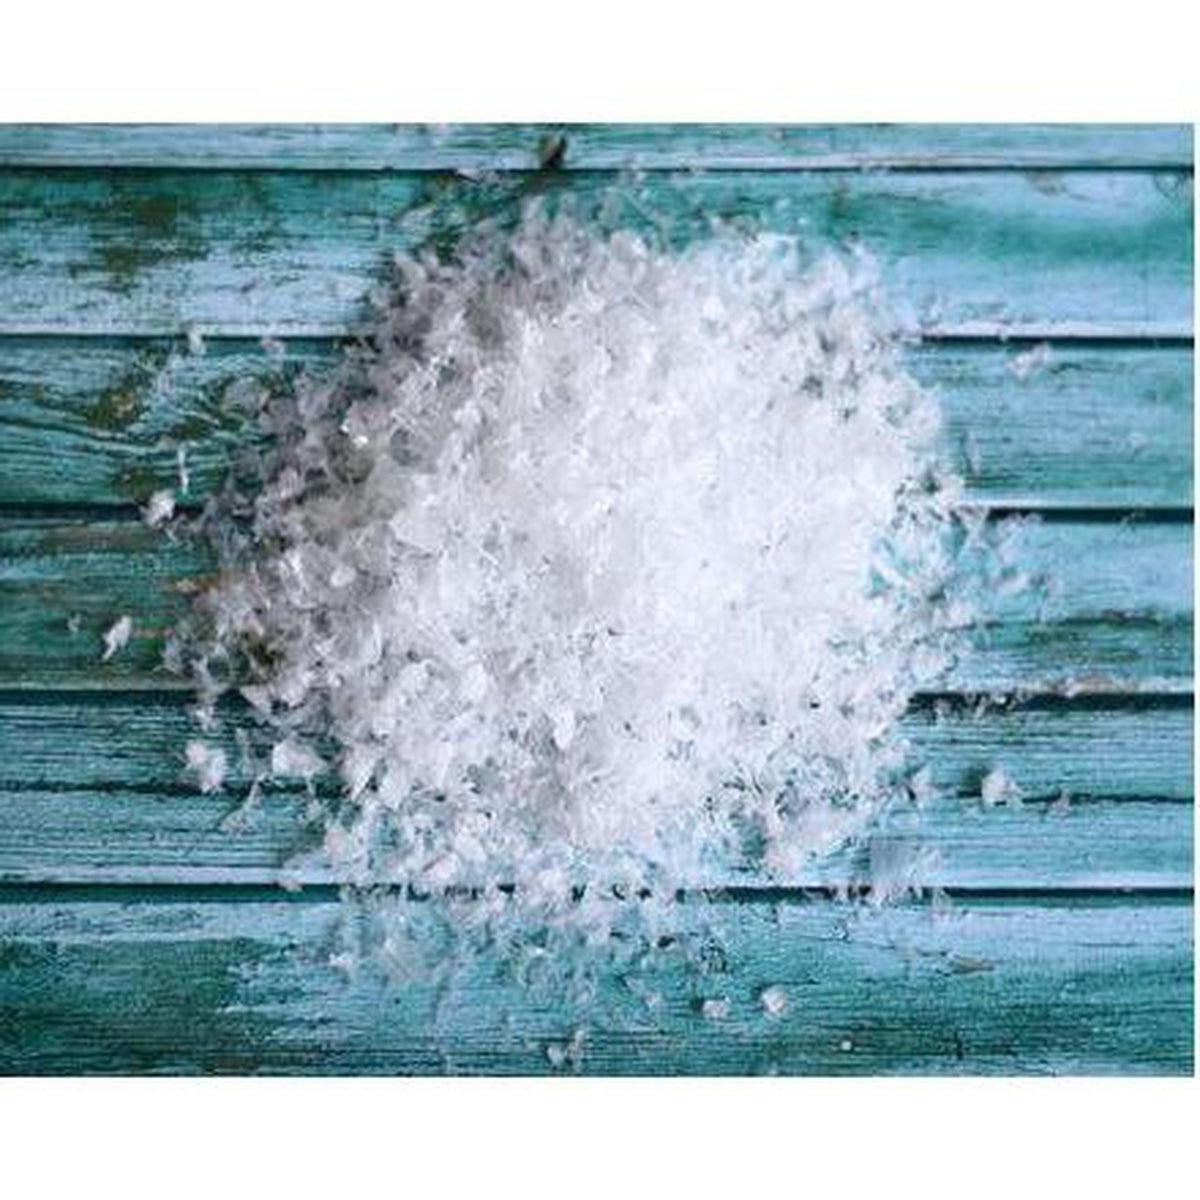 Artificial Snow Maxi (Large Flakes) - CLEARANCE! - Kat Scrappiness